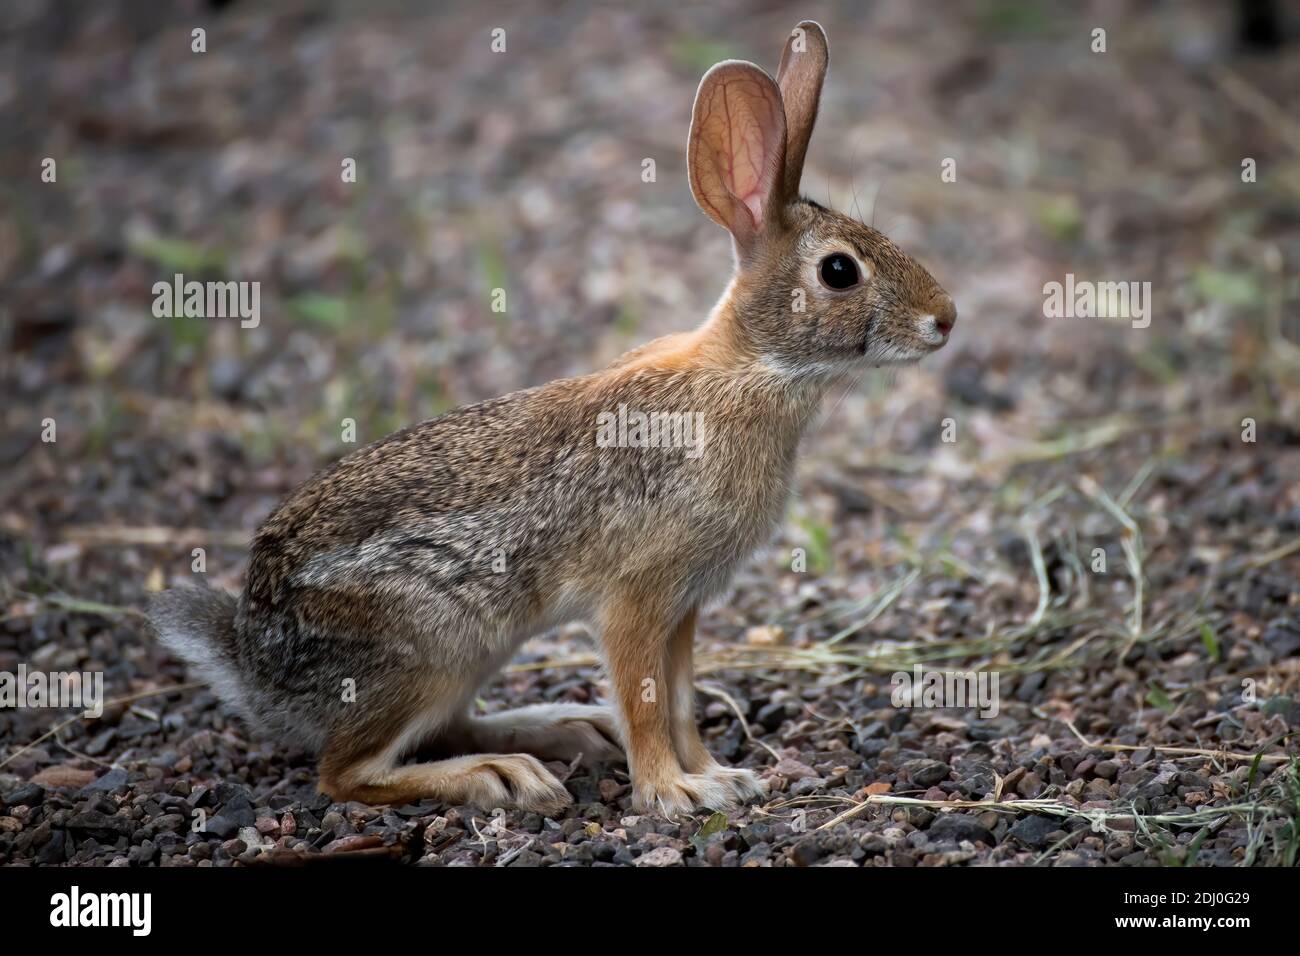 A young antelope jackrabbit is watchful in close up profile. Stock Photo